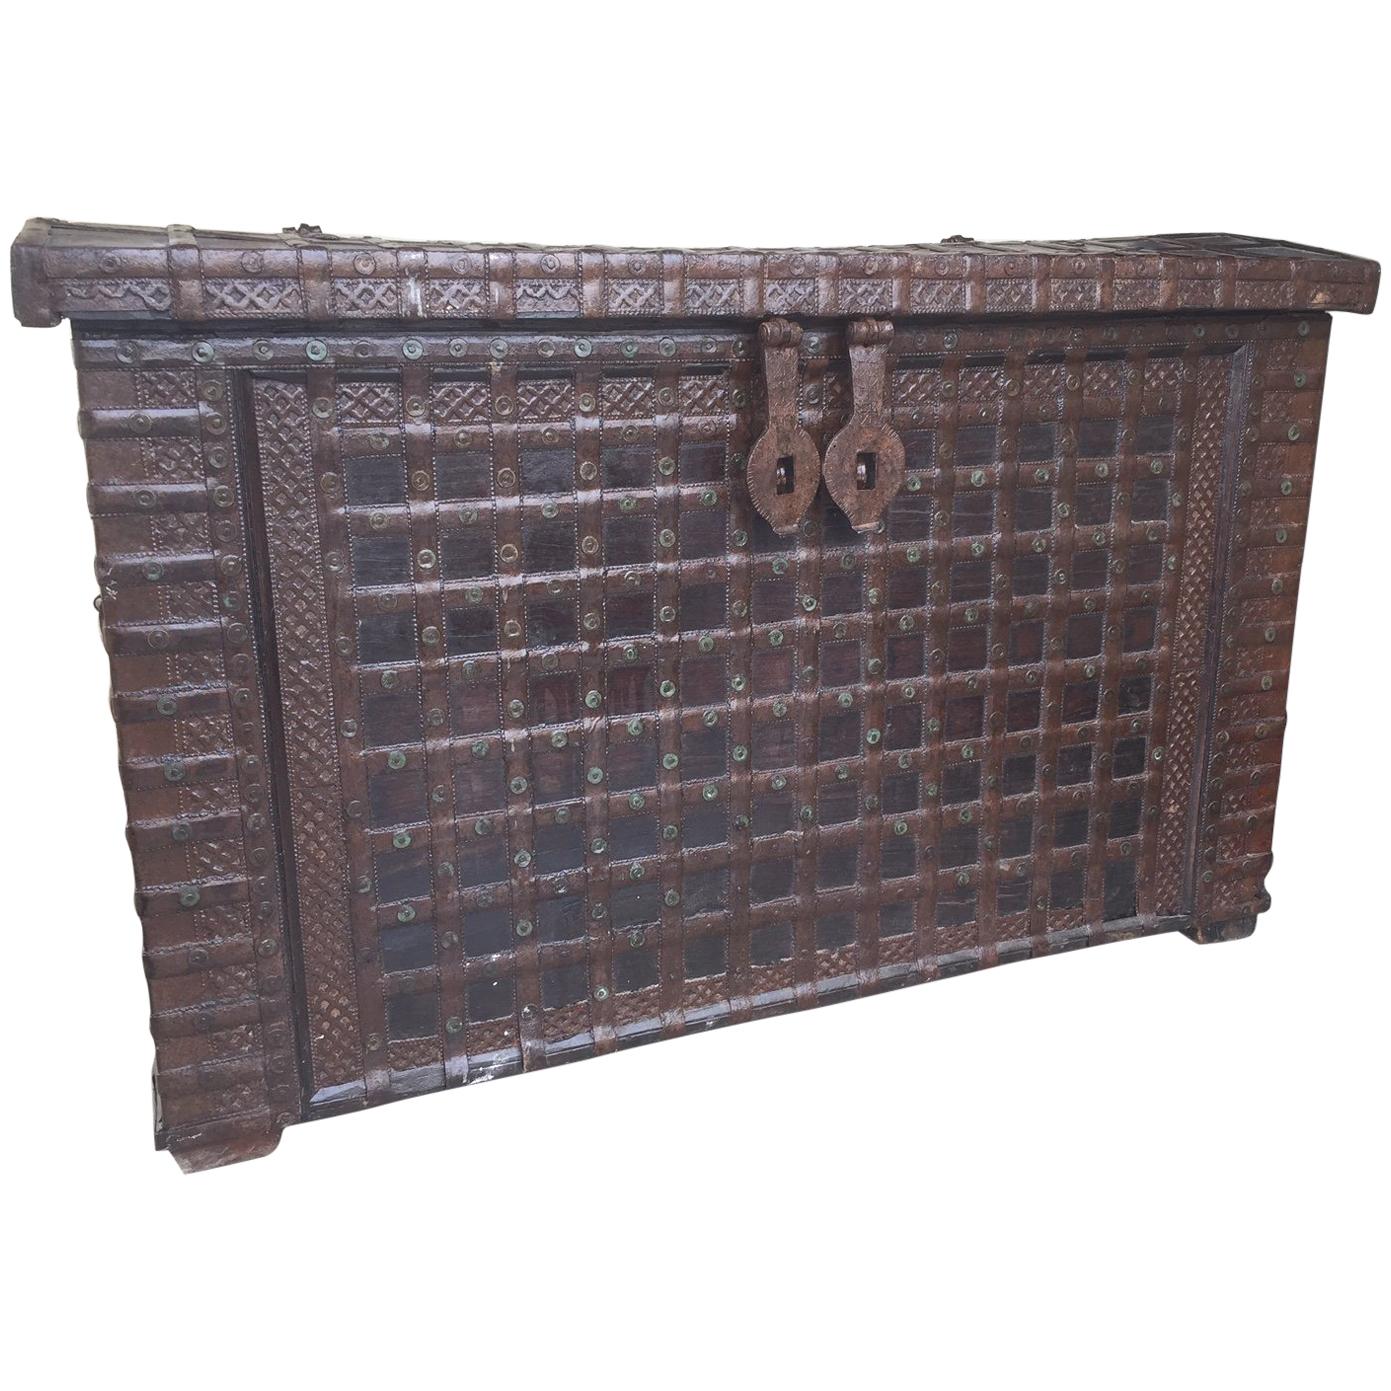 20th Century Indian Large Iron and Wood Trunk